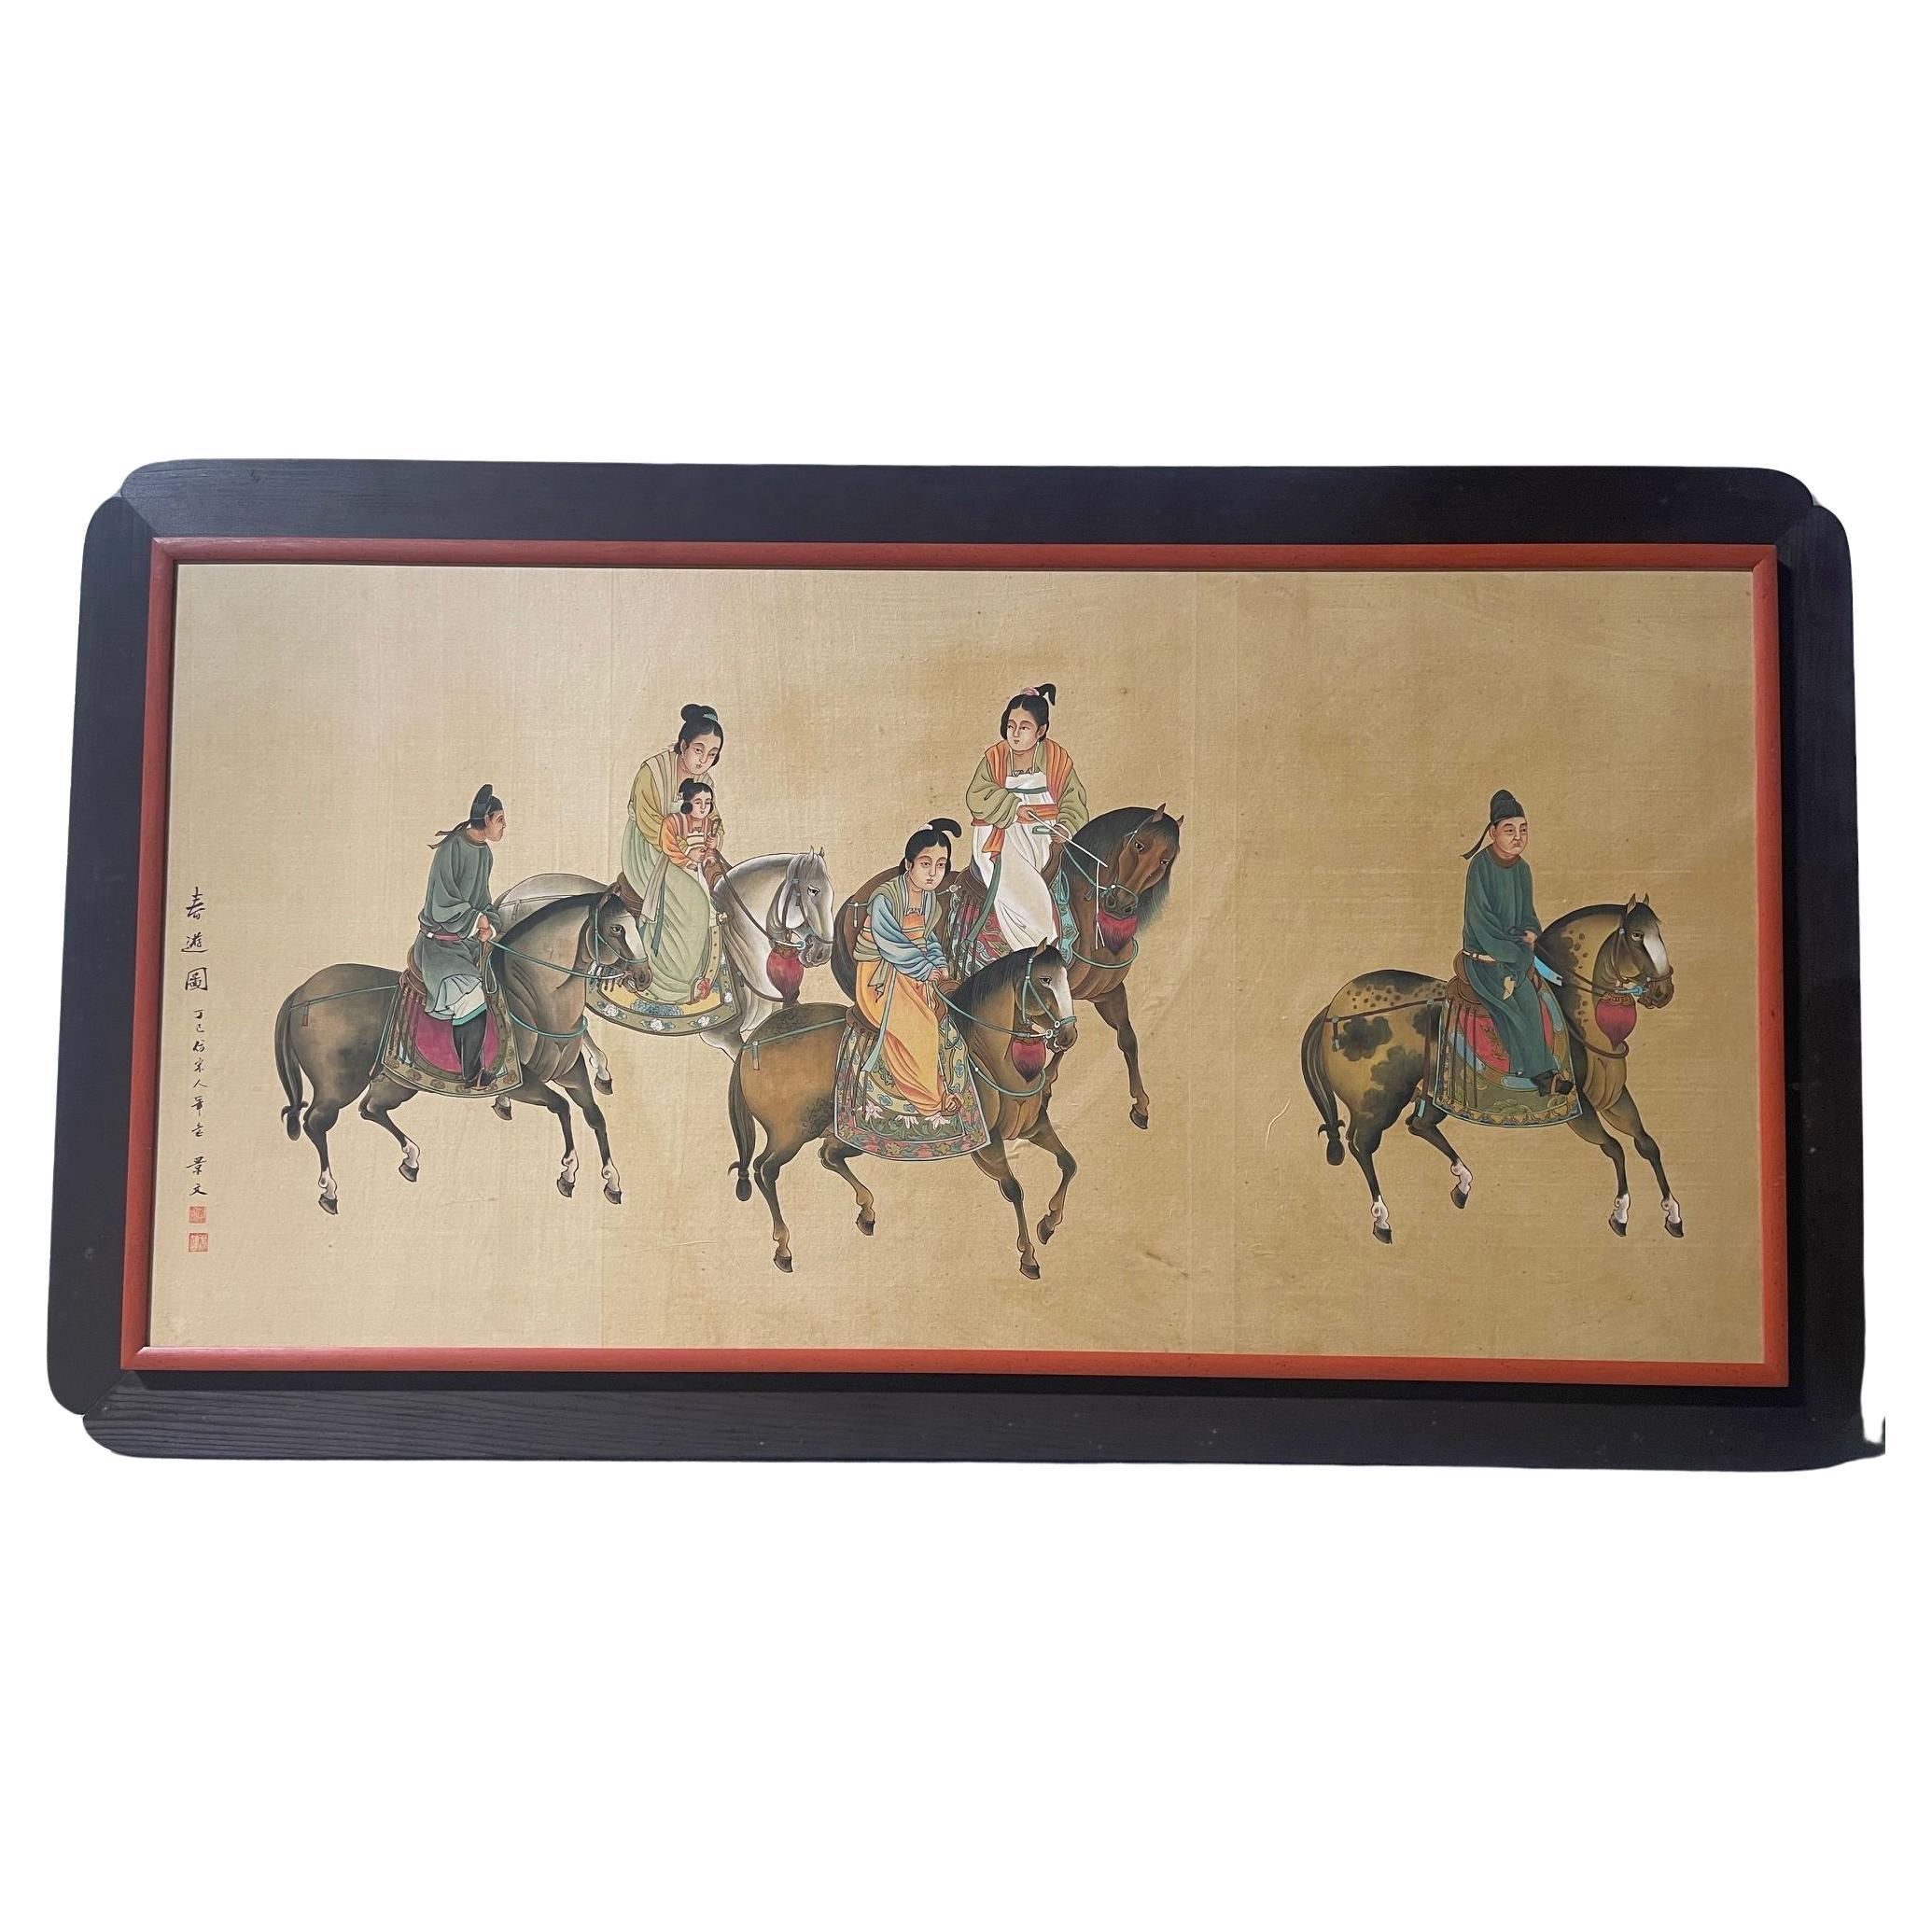 Framed Chinese Painting of A Family on Horses, Late 19th Century